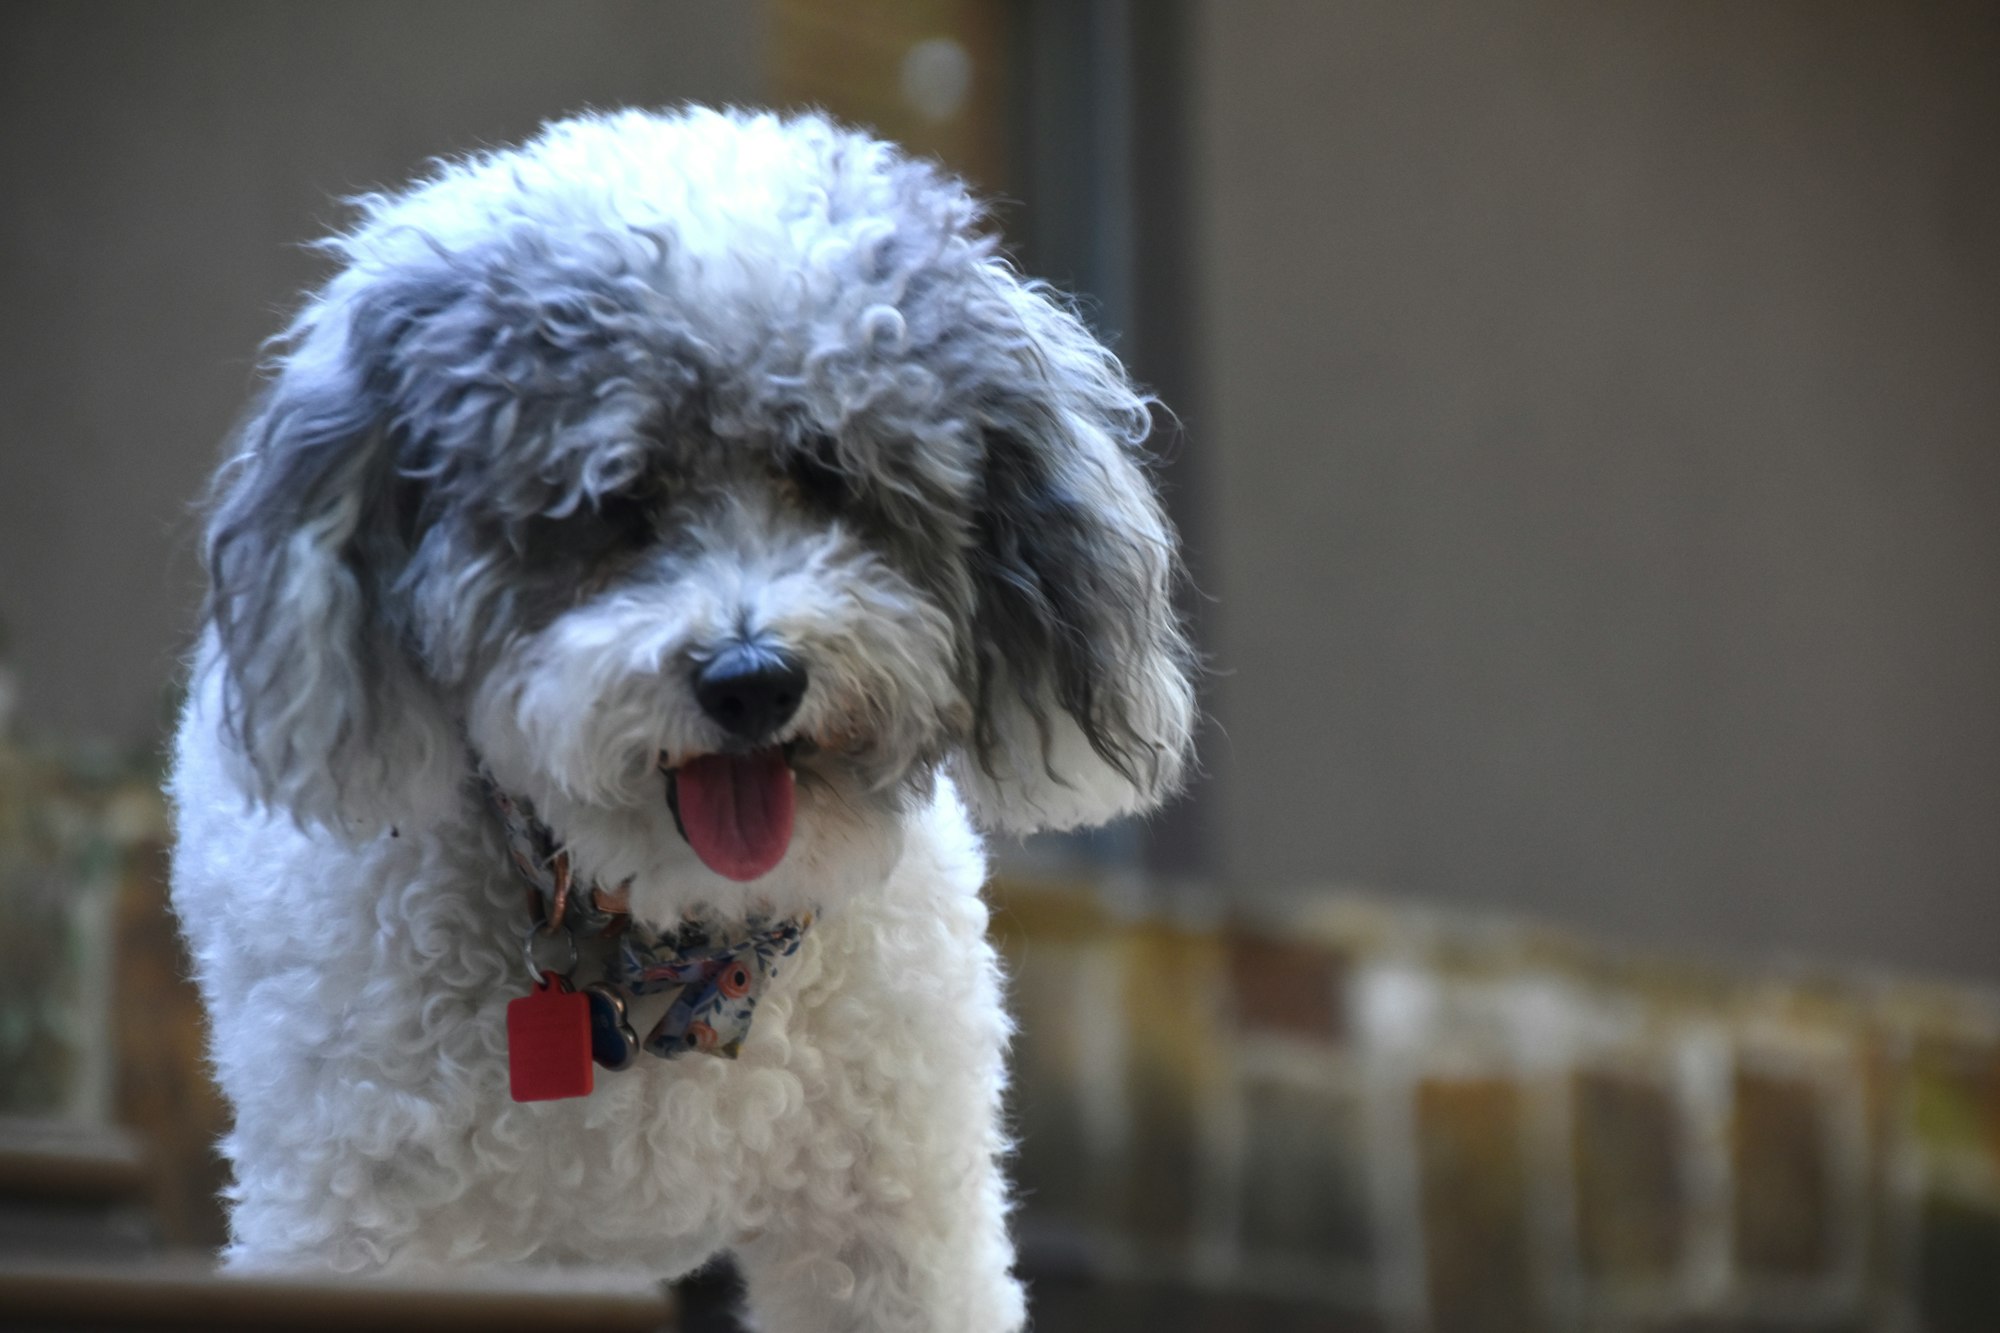 a Bichpoo dog with its tongue out